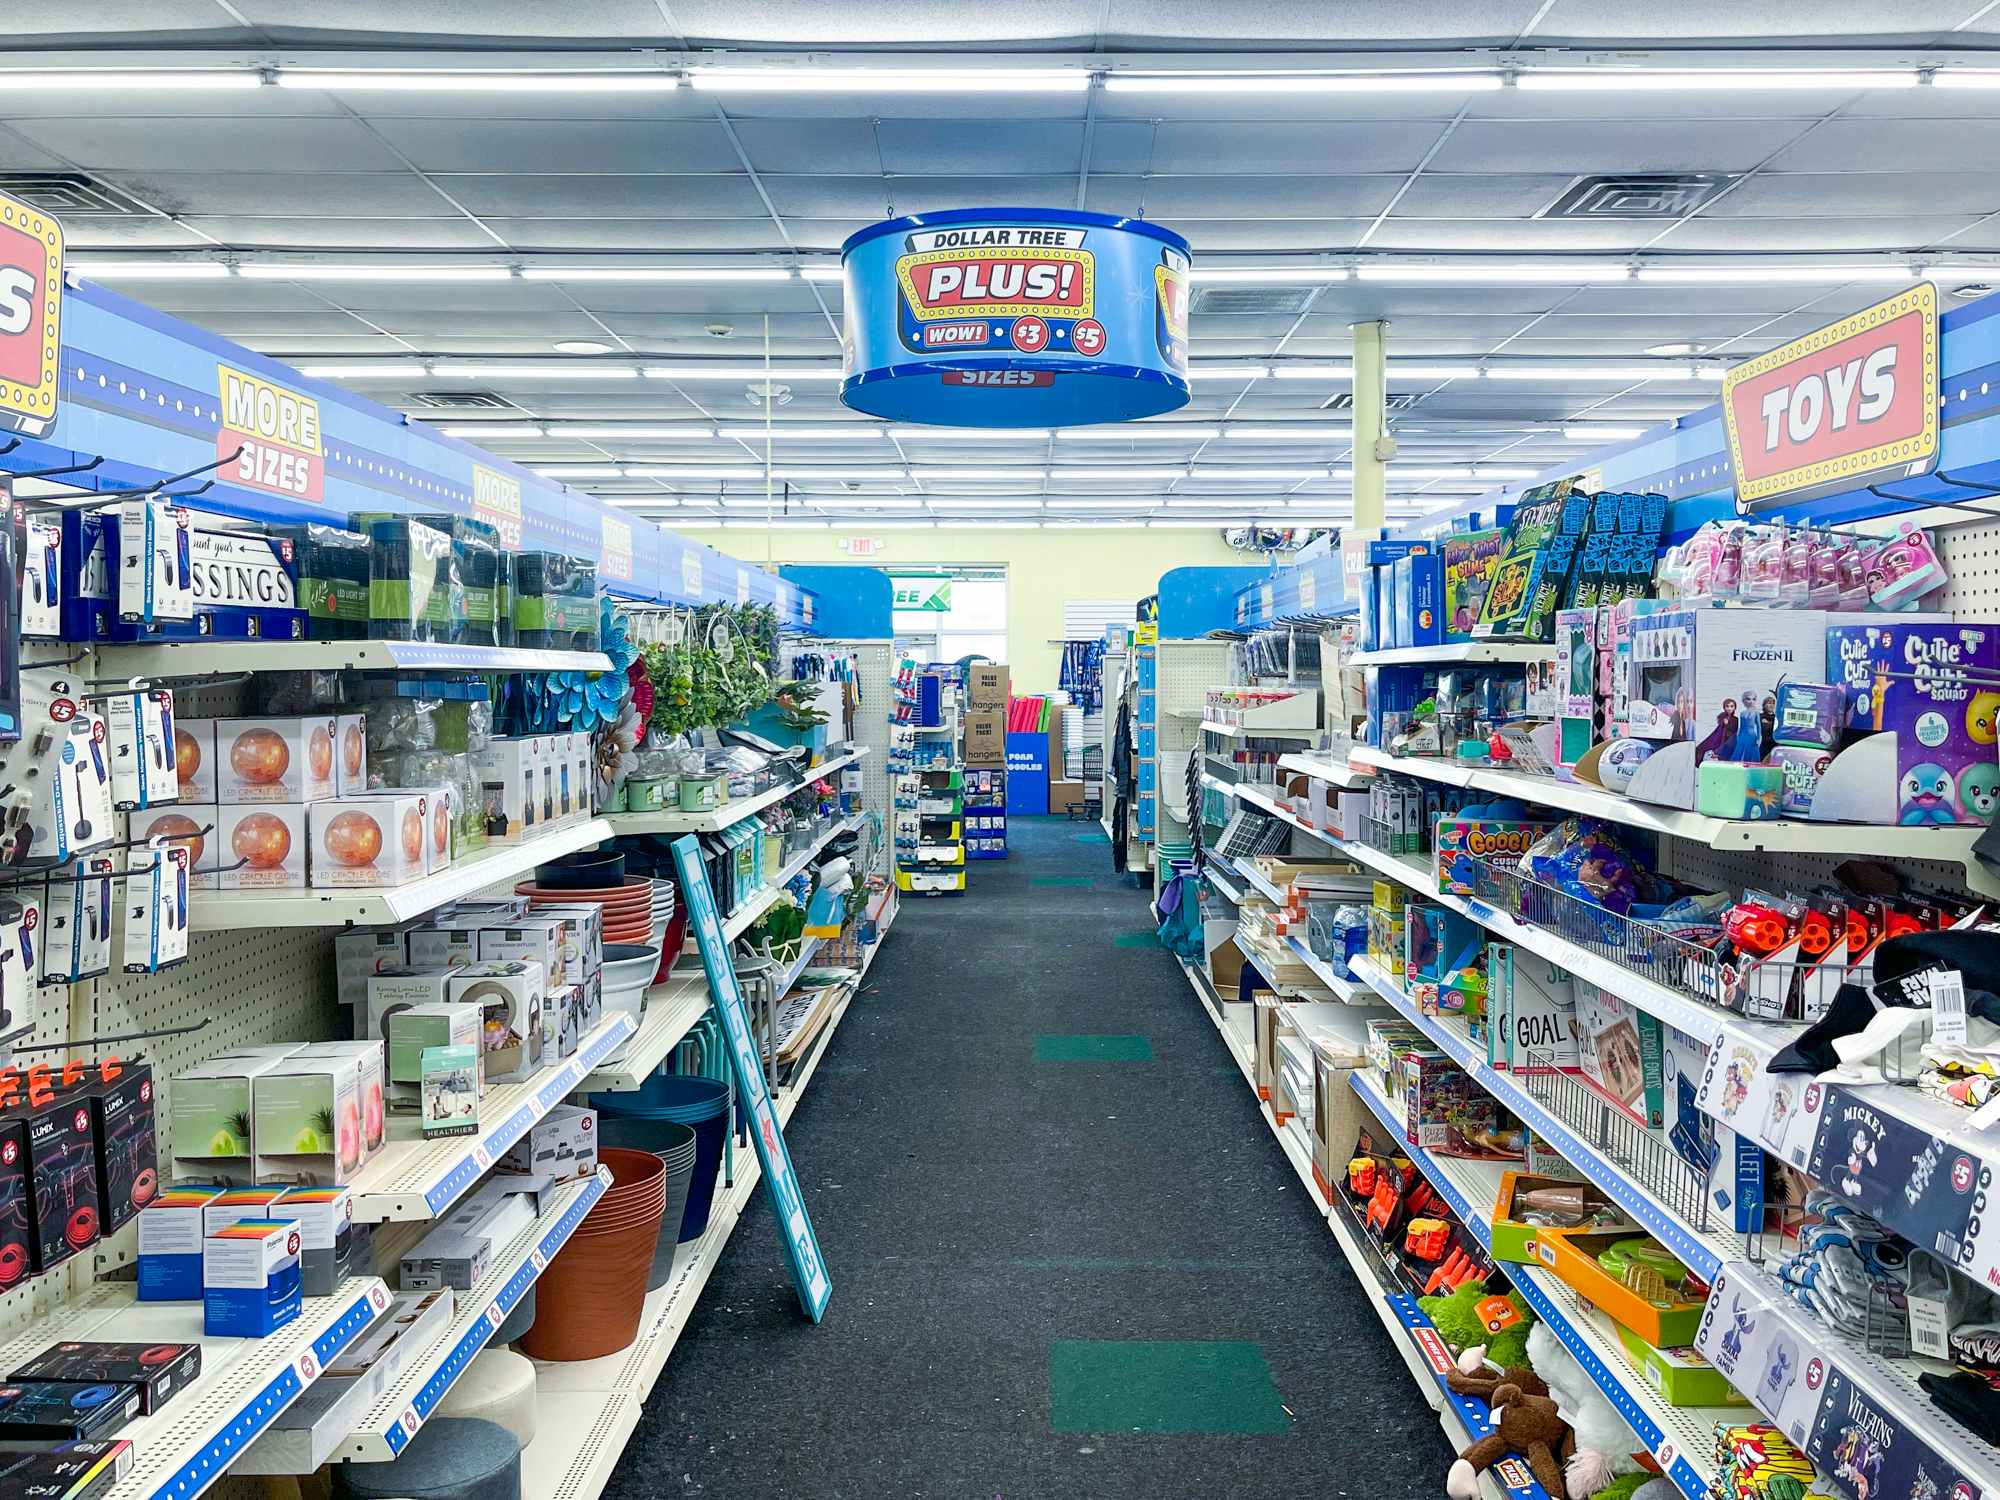 An aisle of Dollar Tree Plus priced items in Dollar Tree